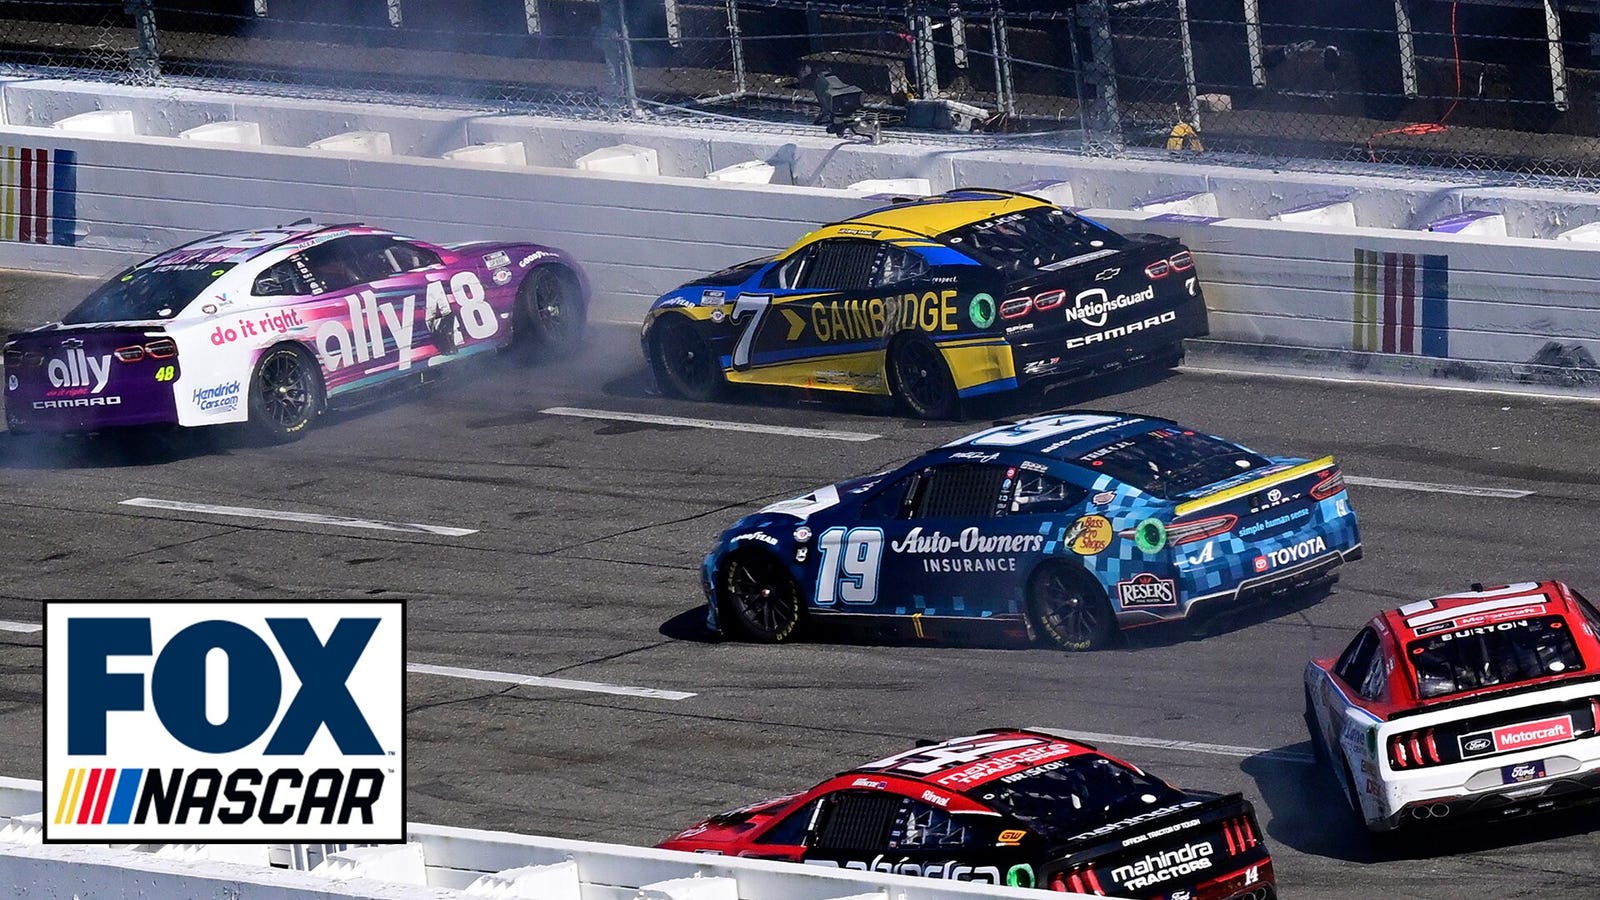 Check out full highlights from the Xfinity 500 from Martinsville Speedway!